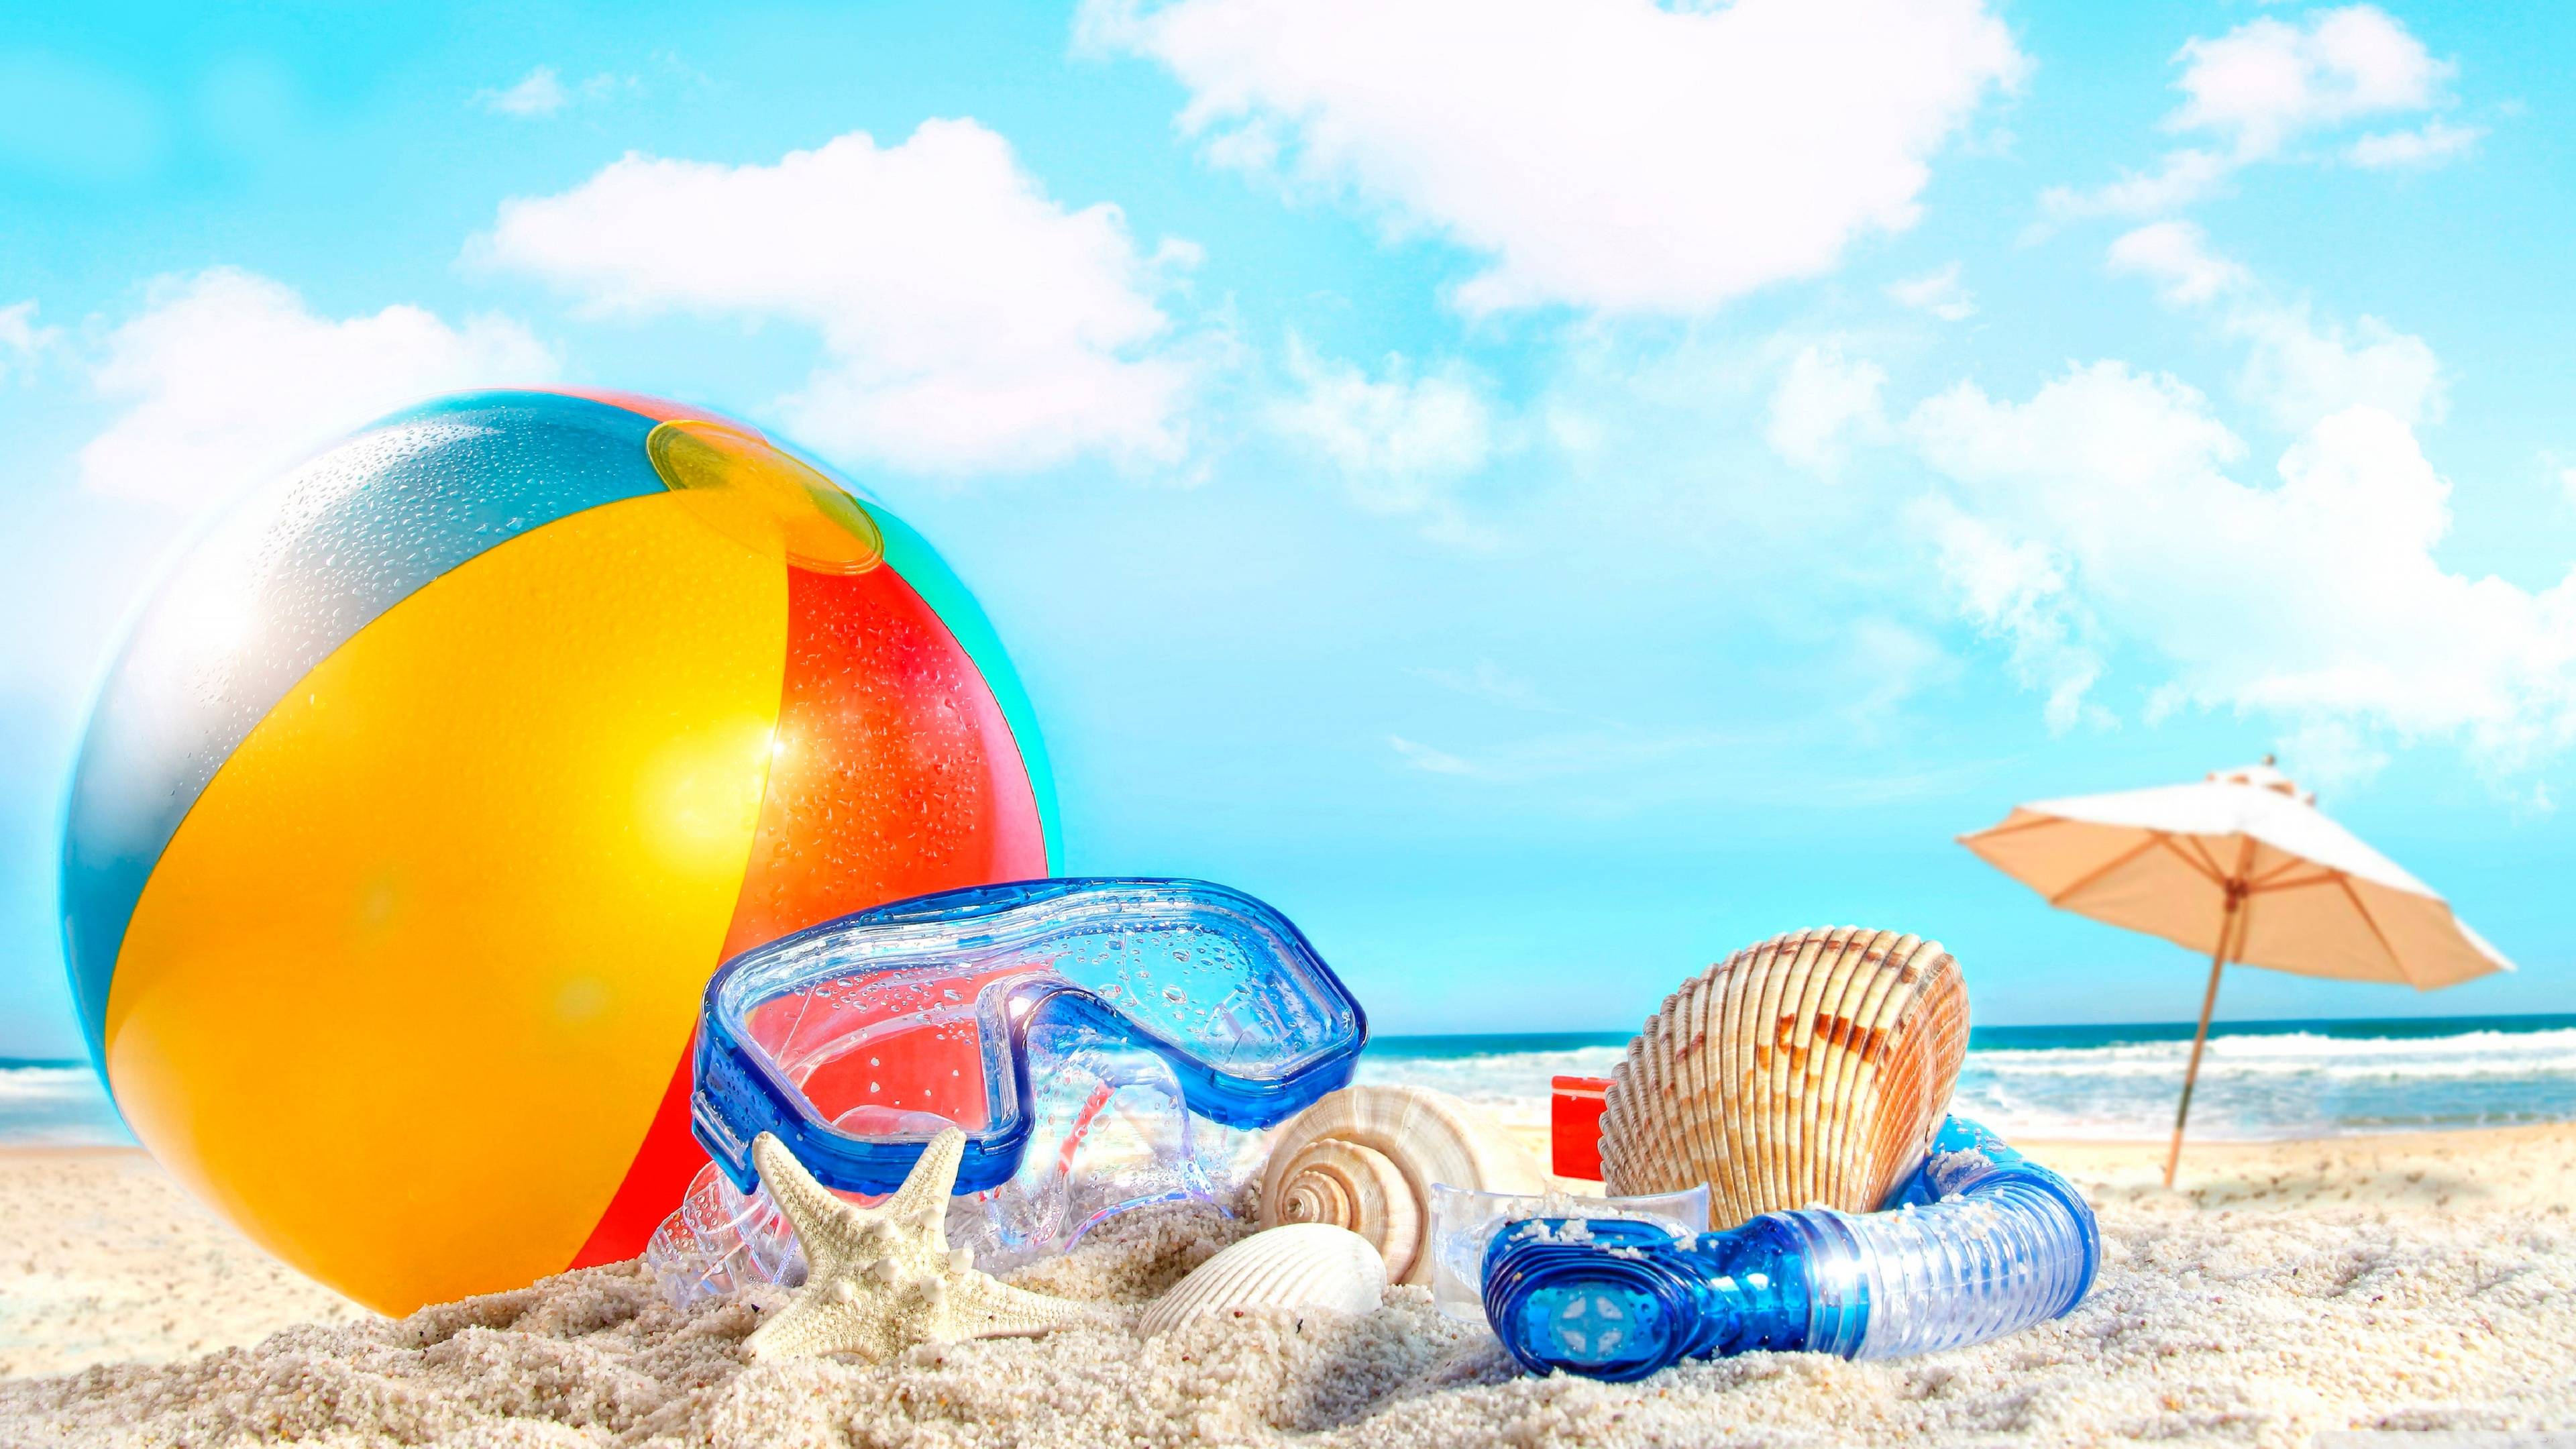 Summer Background Images Free - Wallpaper Cave